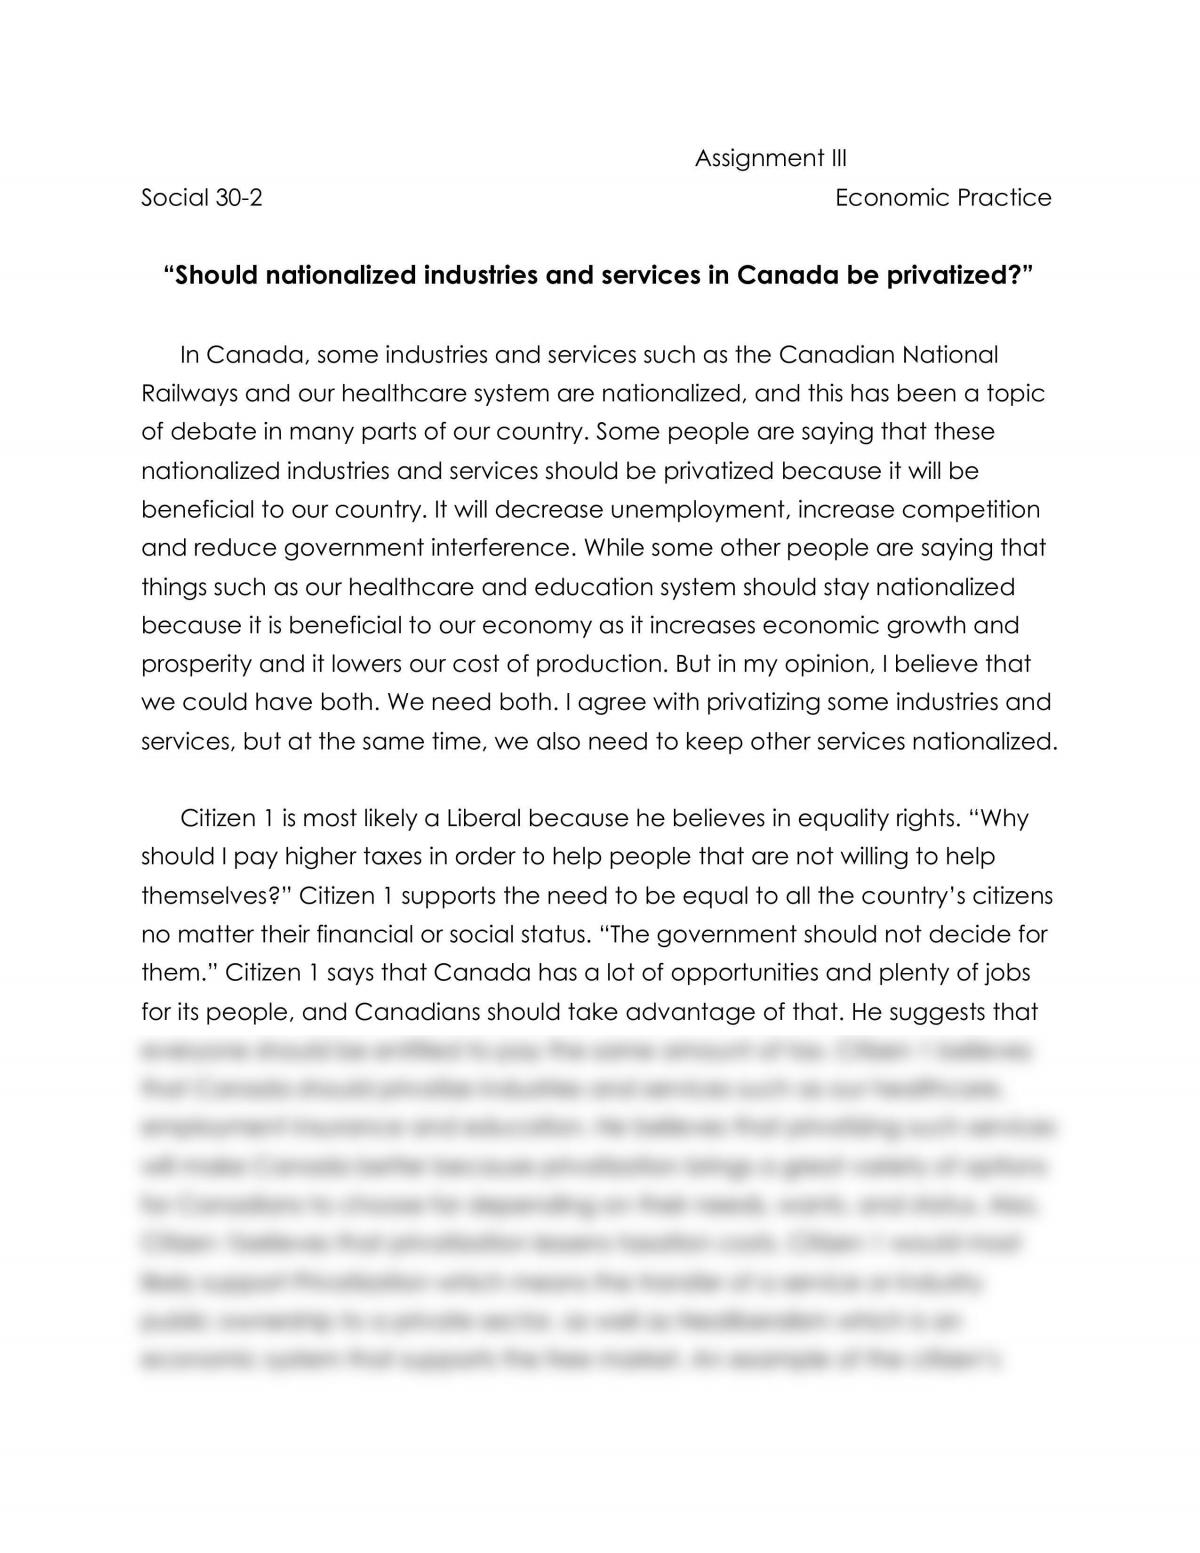 should the canadian healthcare system be privatized essay